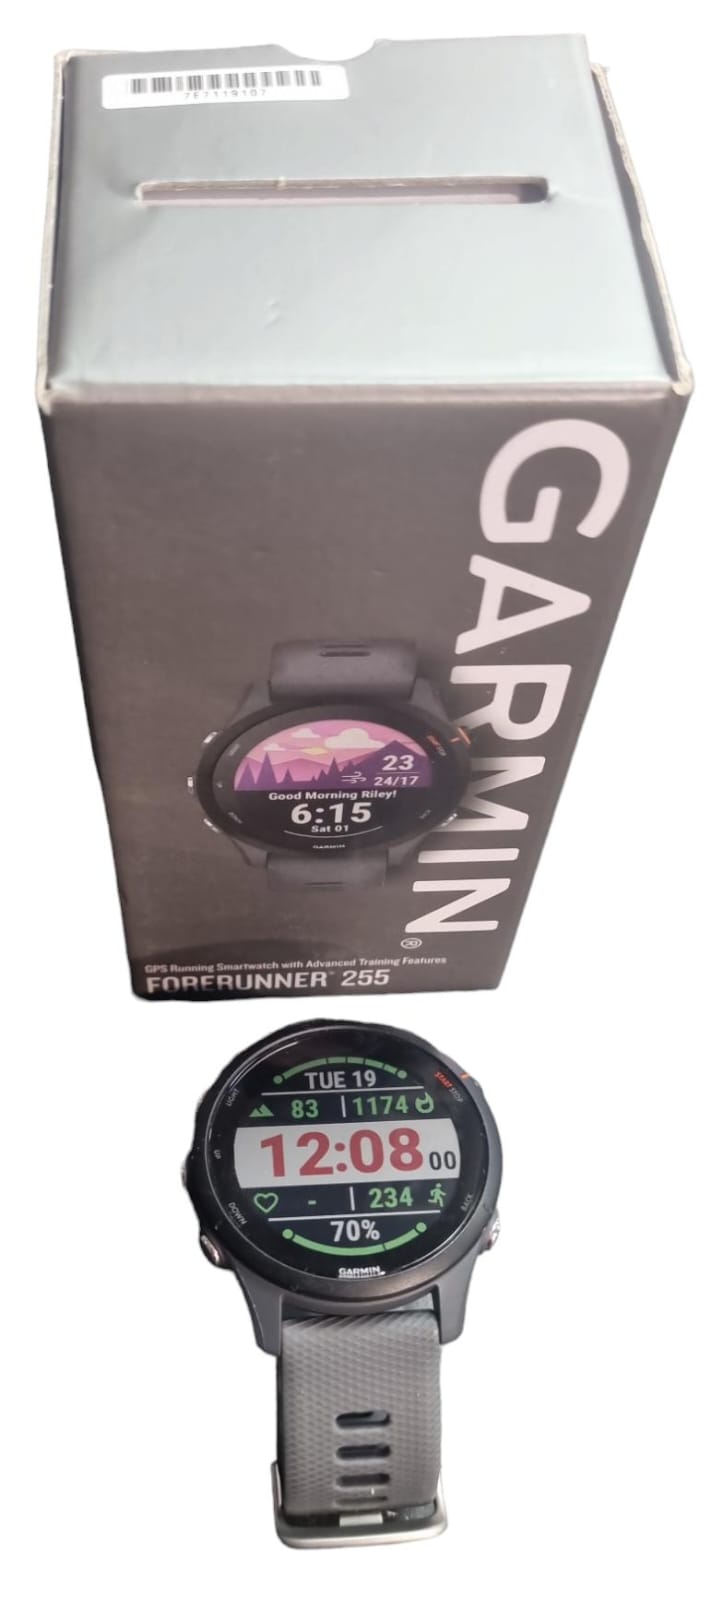 Garmin Forerunner 255 - GPS Running Smartwatch With Advanced Training Features - Boxed